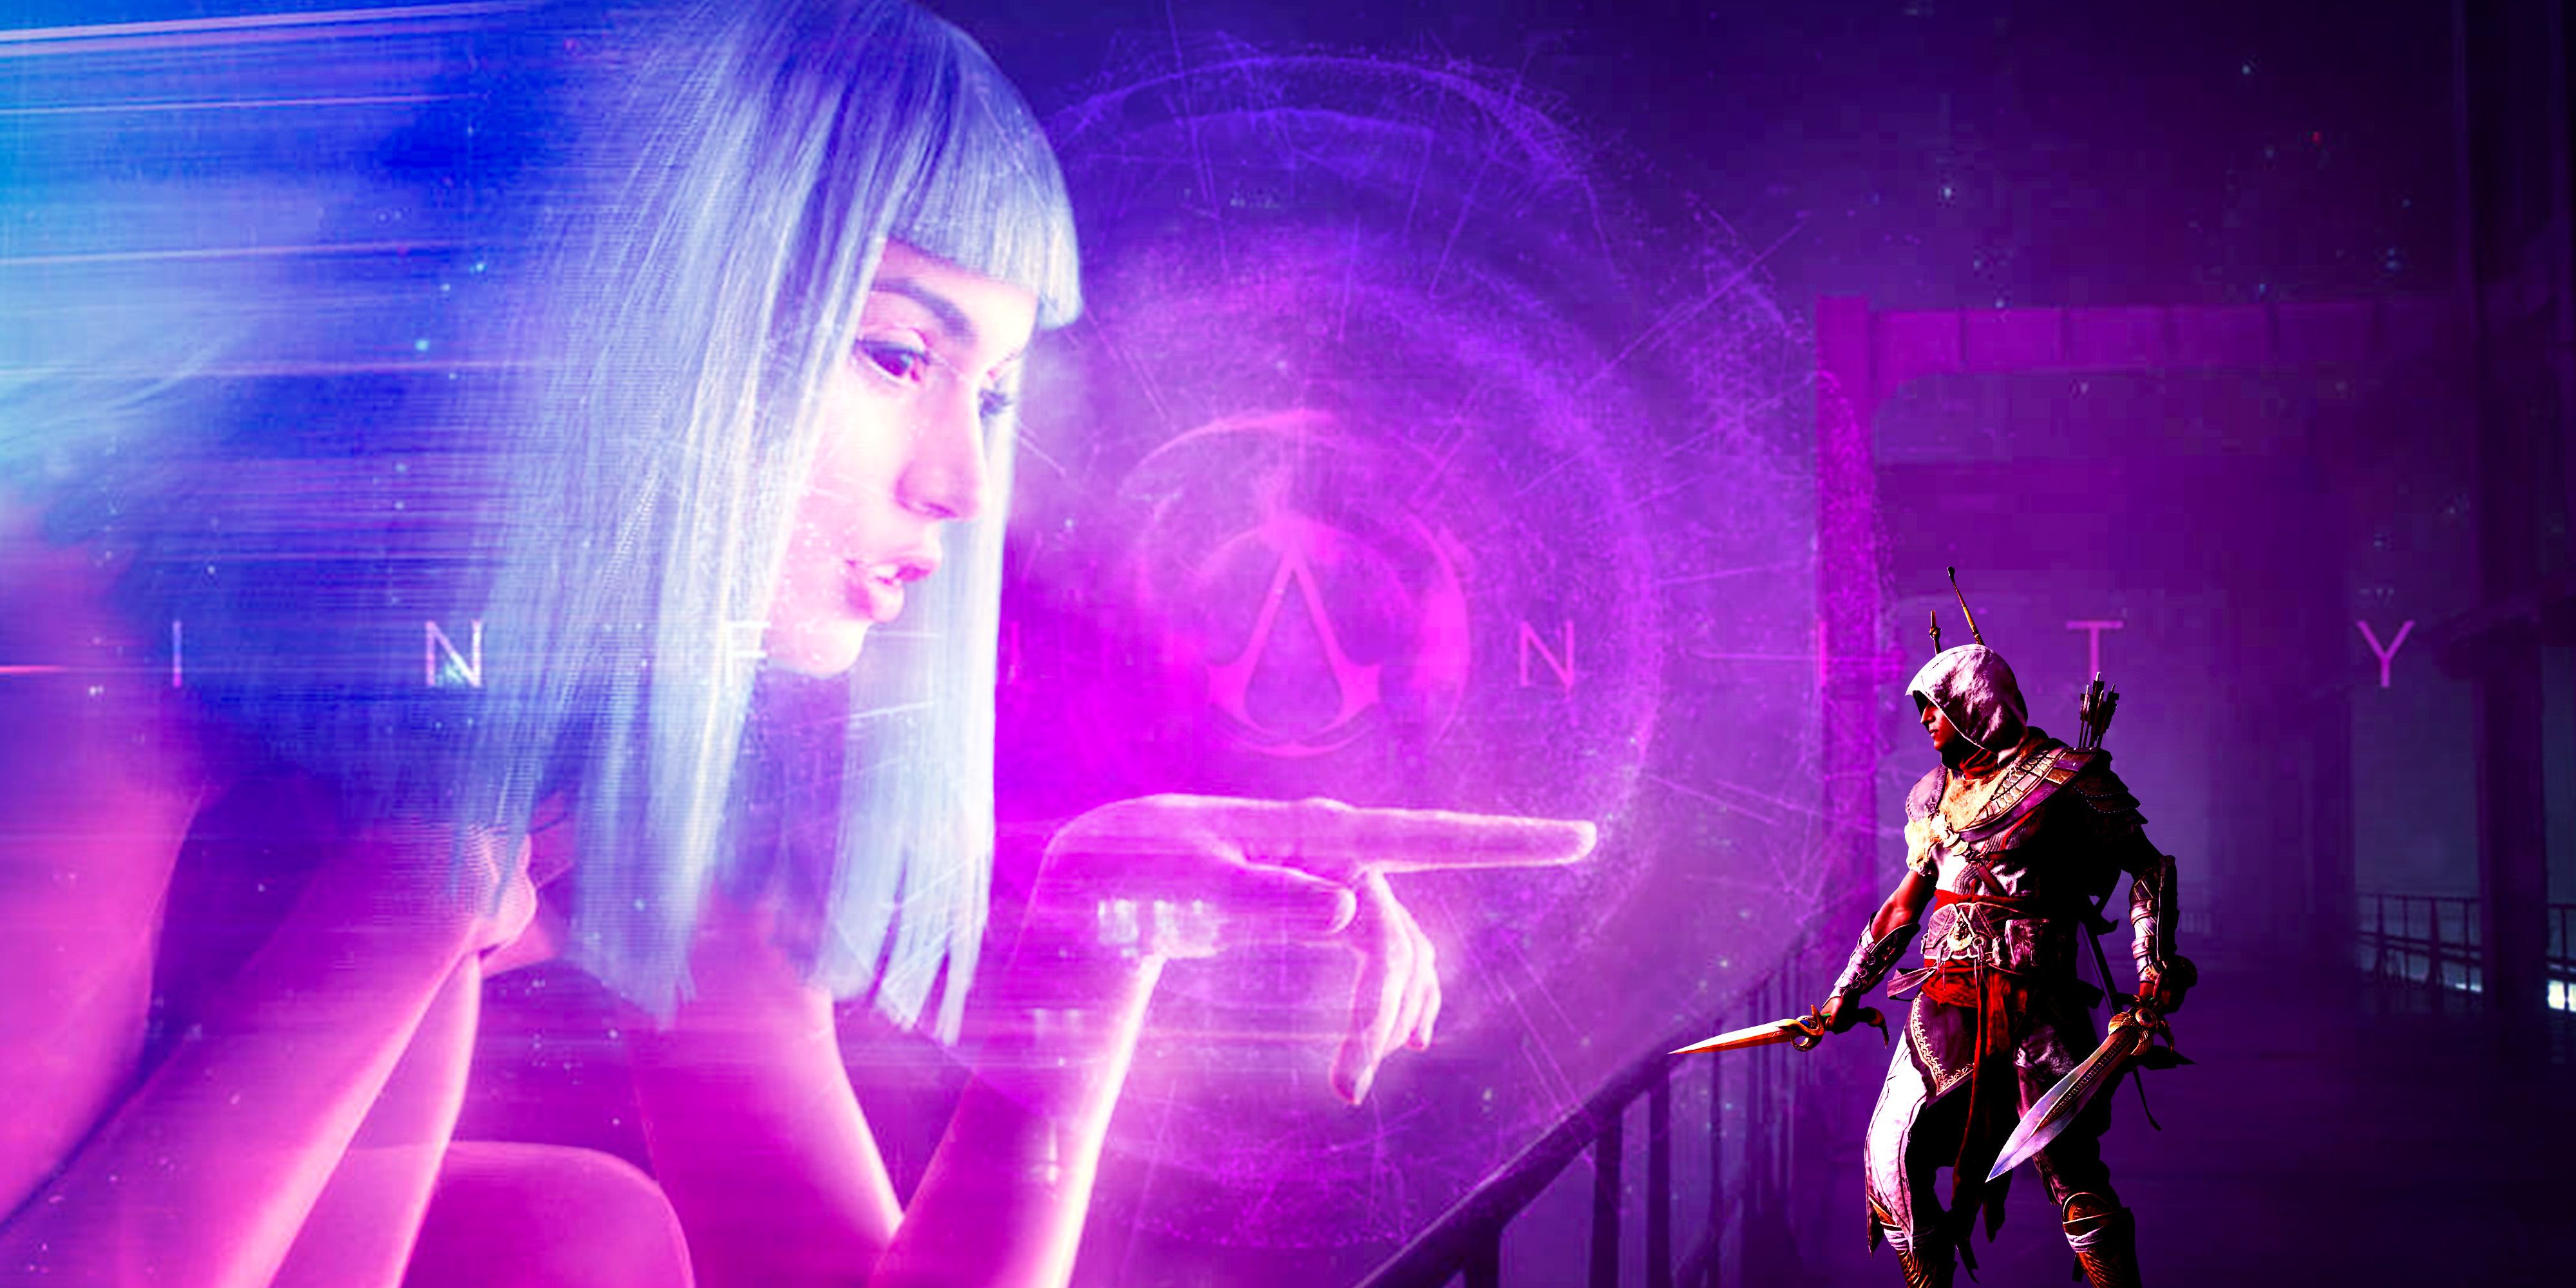 Ana de Armas as a huge hologram in Blade Runner 2049 reaching out to an assassin, with the Assassin's Creed logo in the background